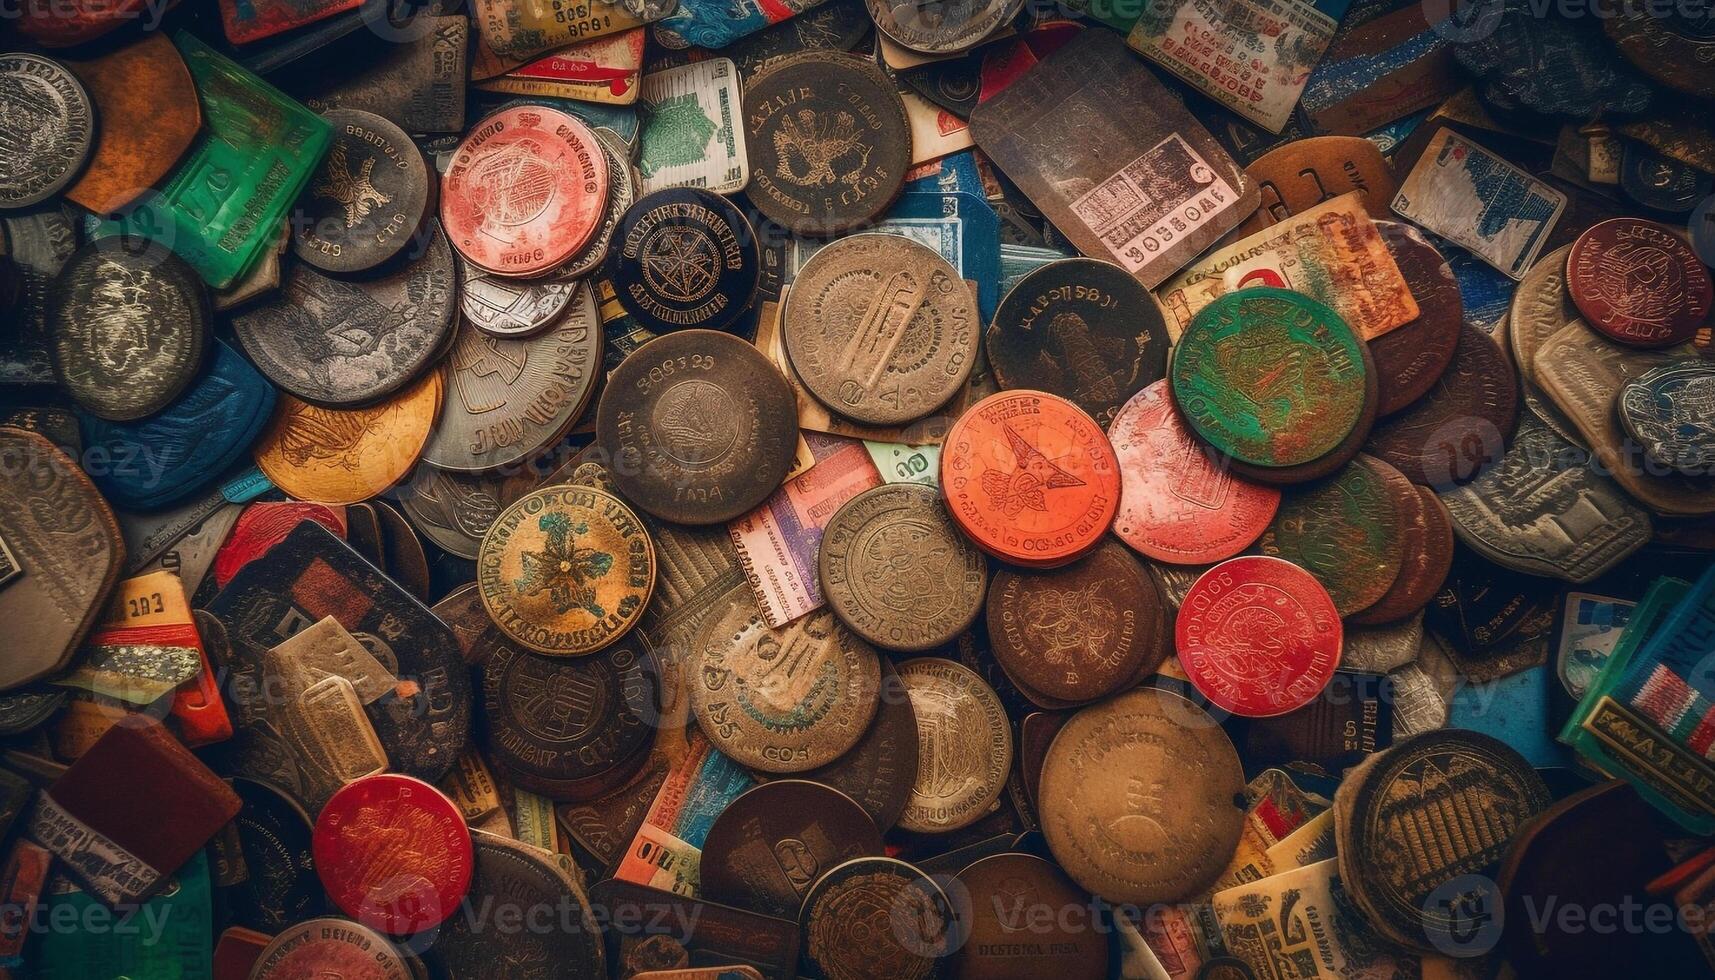 Turkish leather store sells antique metalwork at flea market generated by AI photo